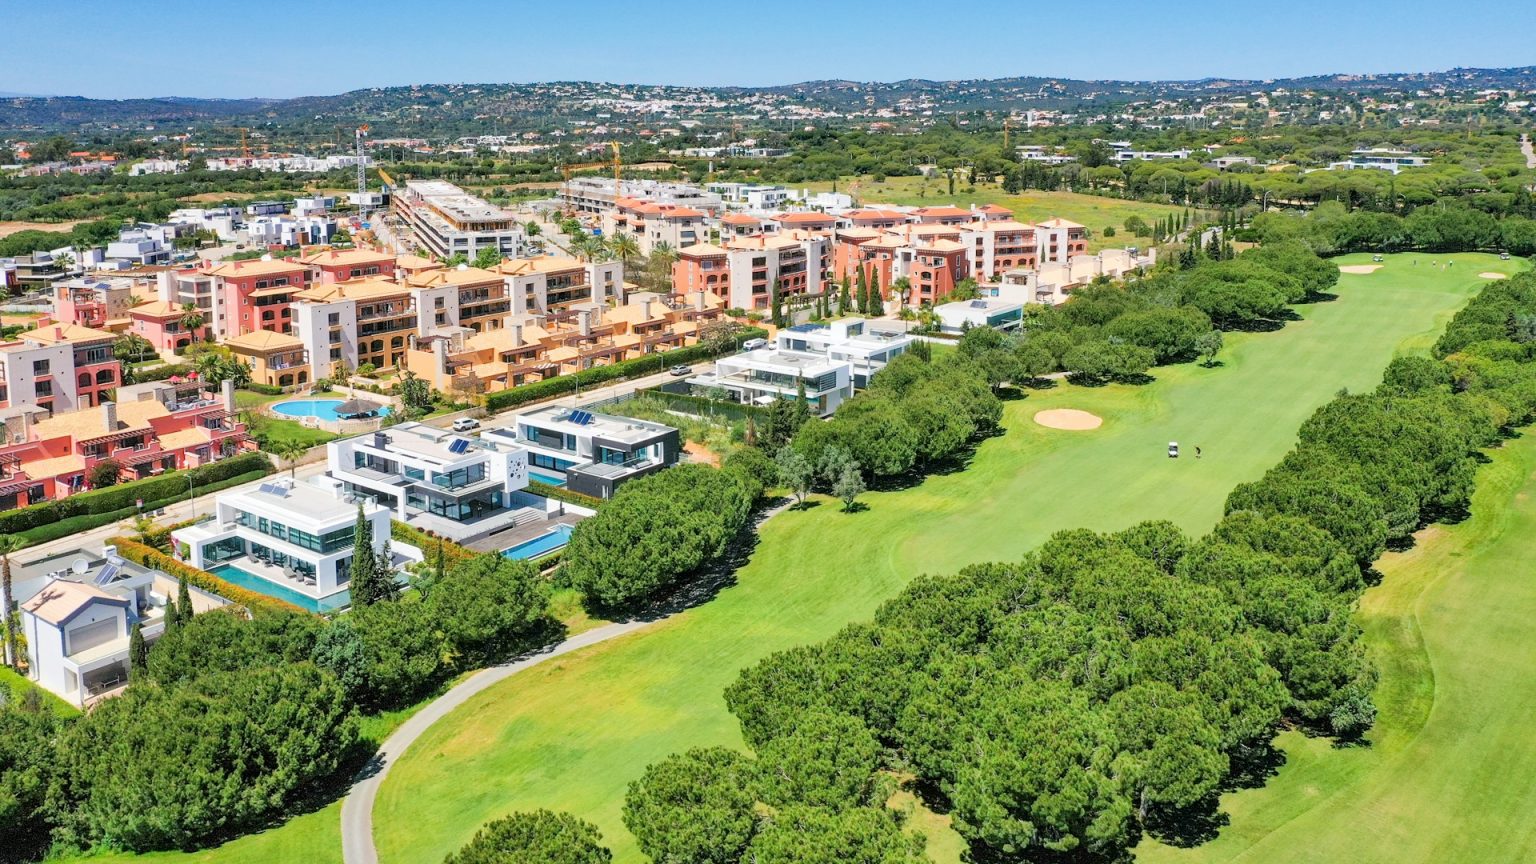 Discover Golfing Paradise with The Best Golf Courses in Algarve